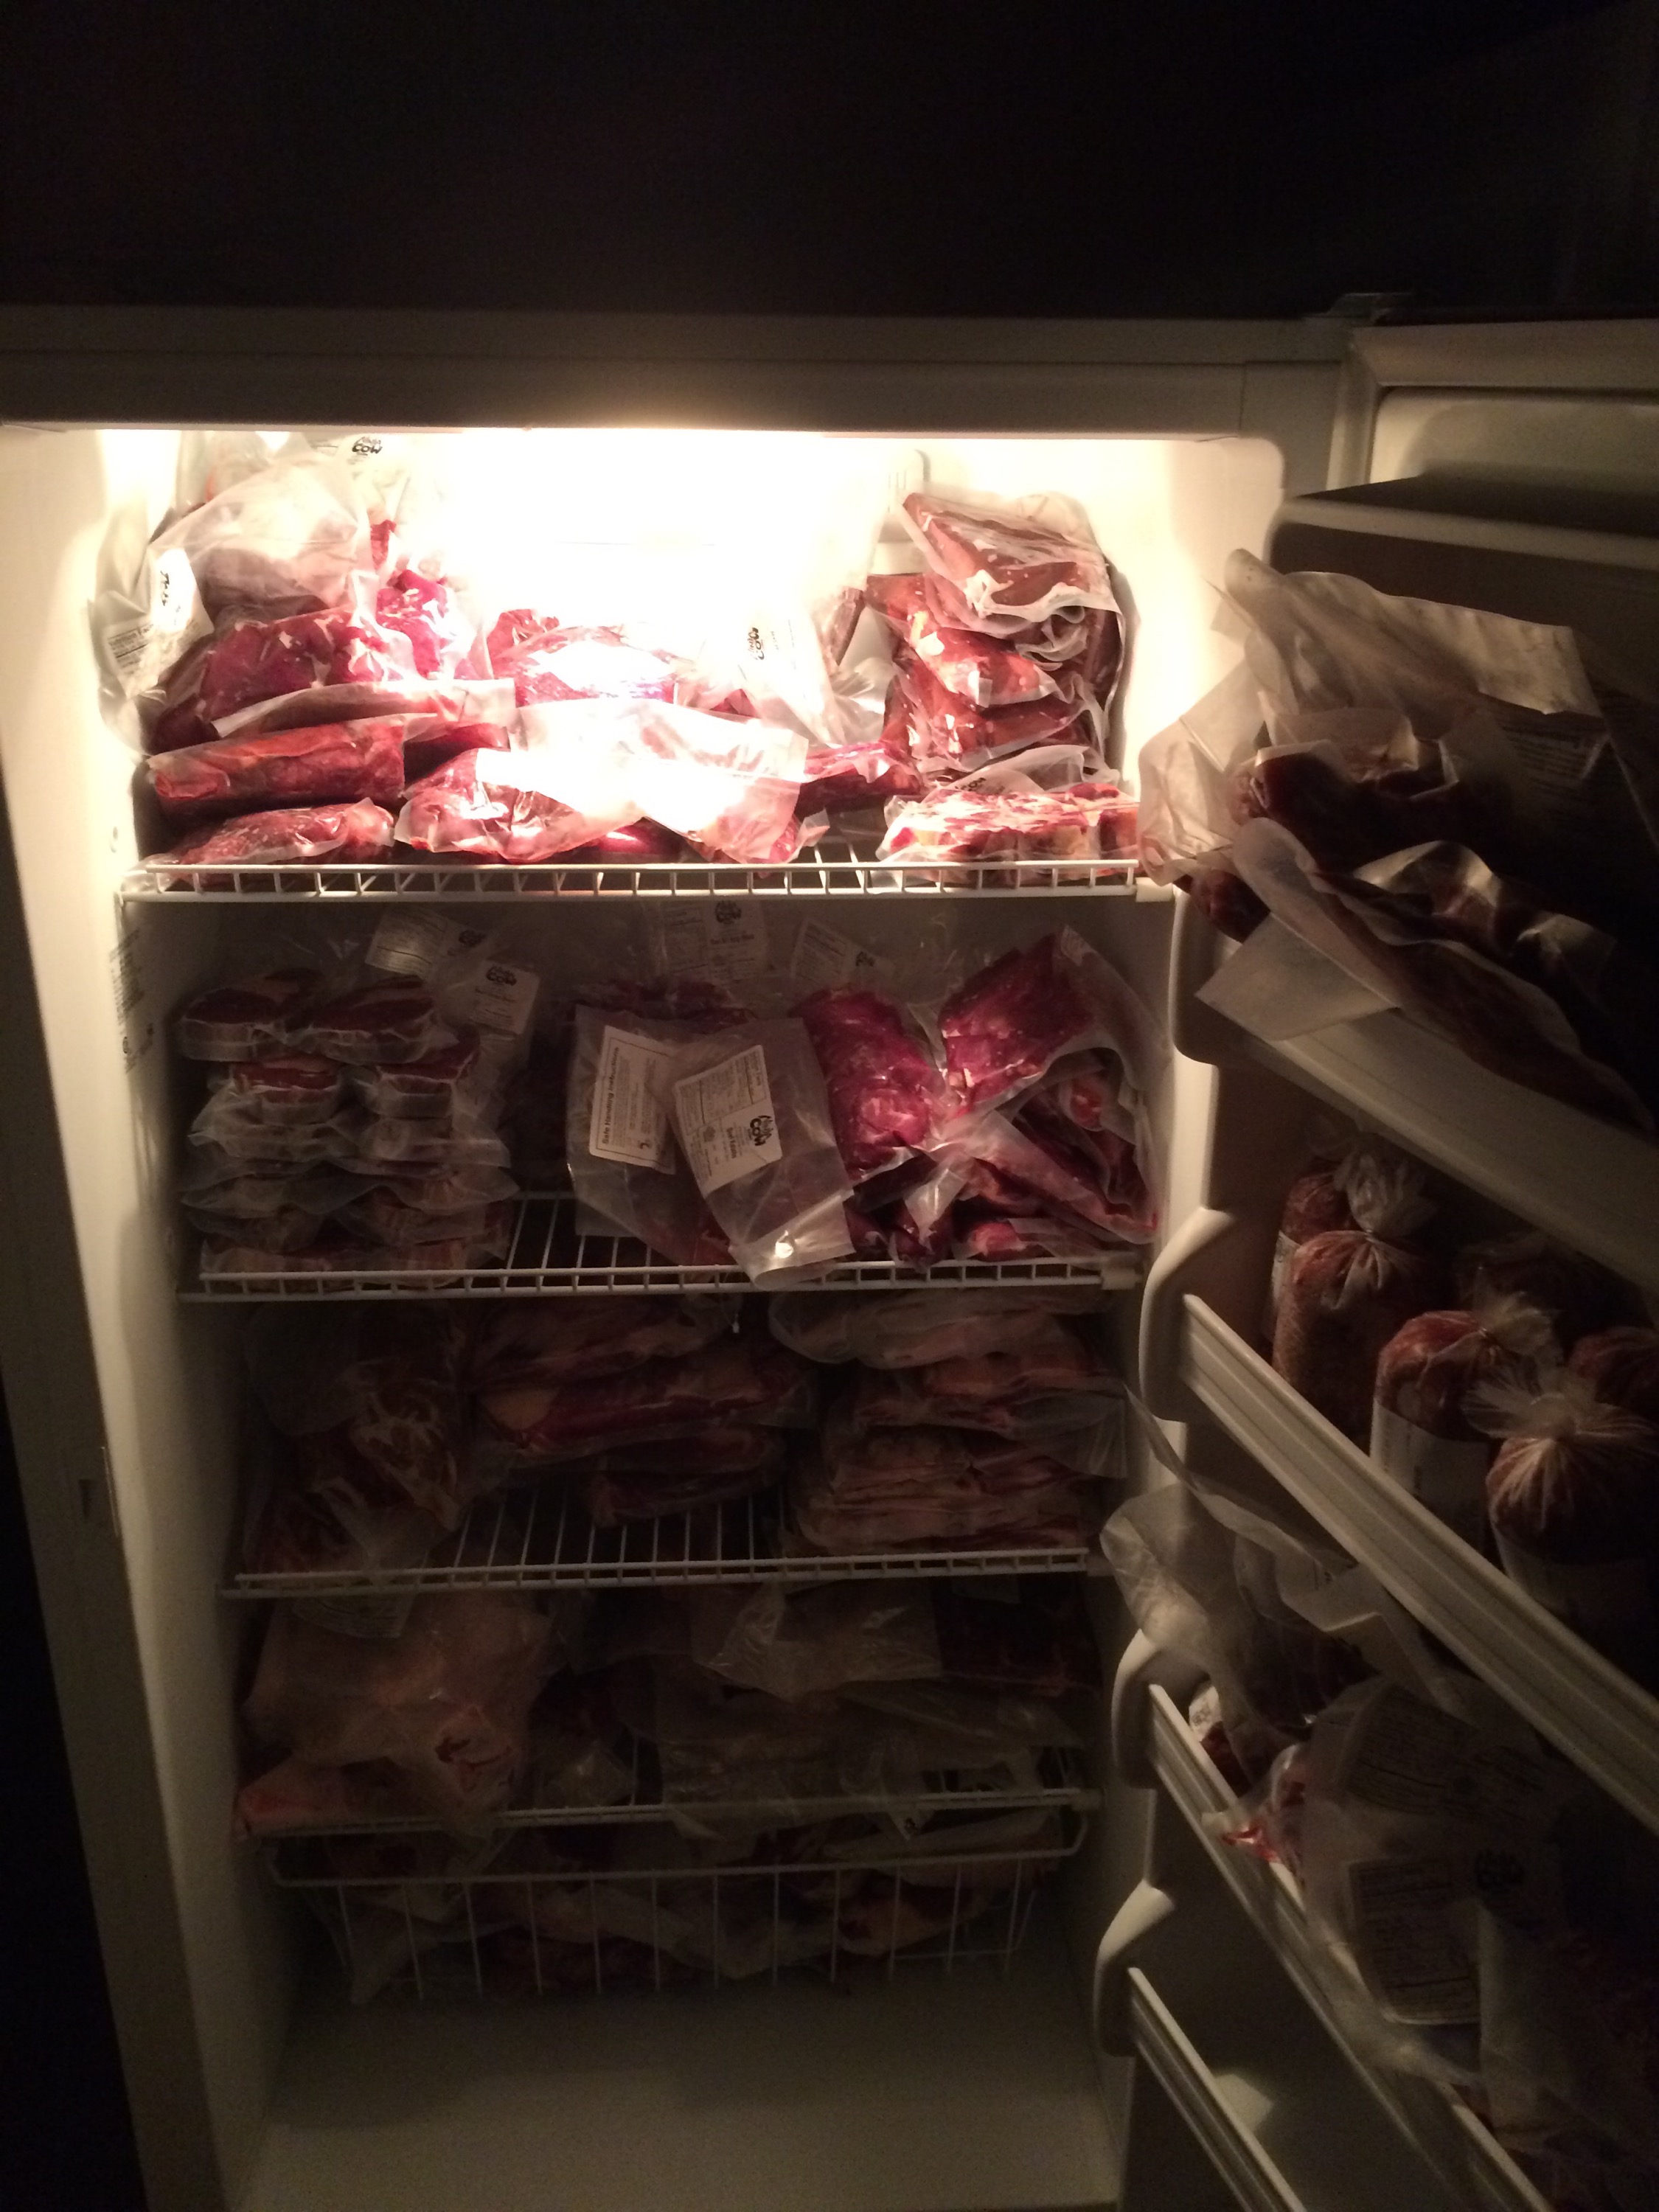 A freezer full of meat